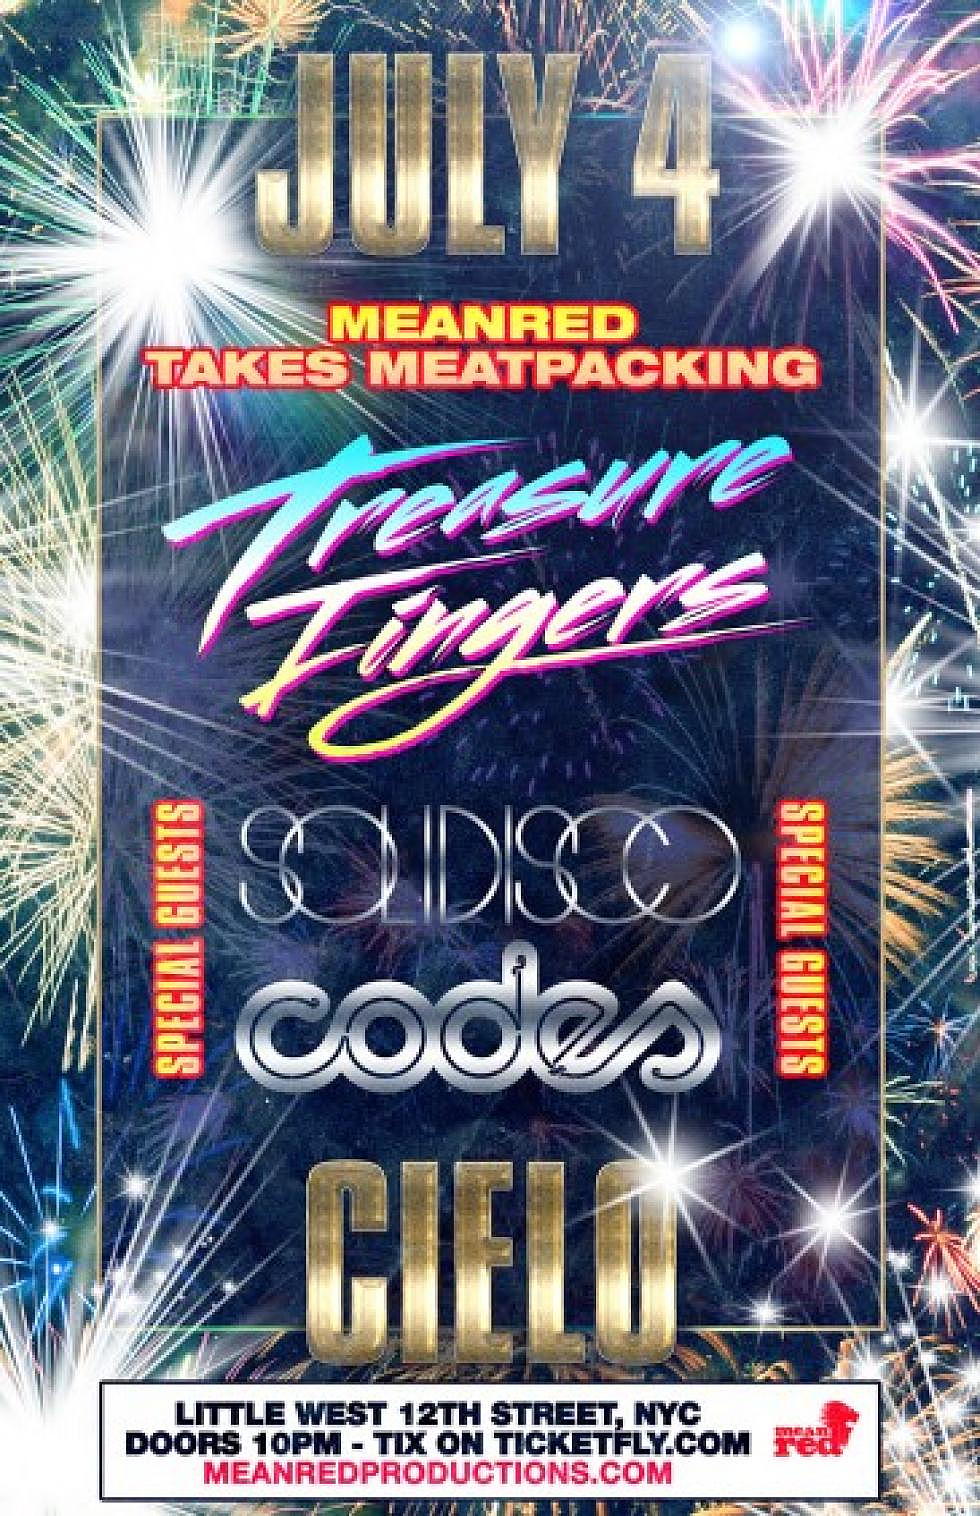 Treasure Fingers, Solidisco, Codes @ Cielo NYC: Built By MeanRed